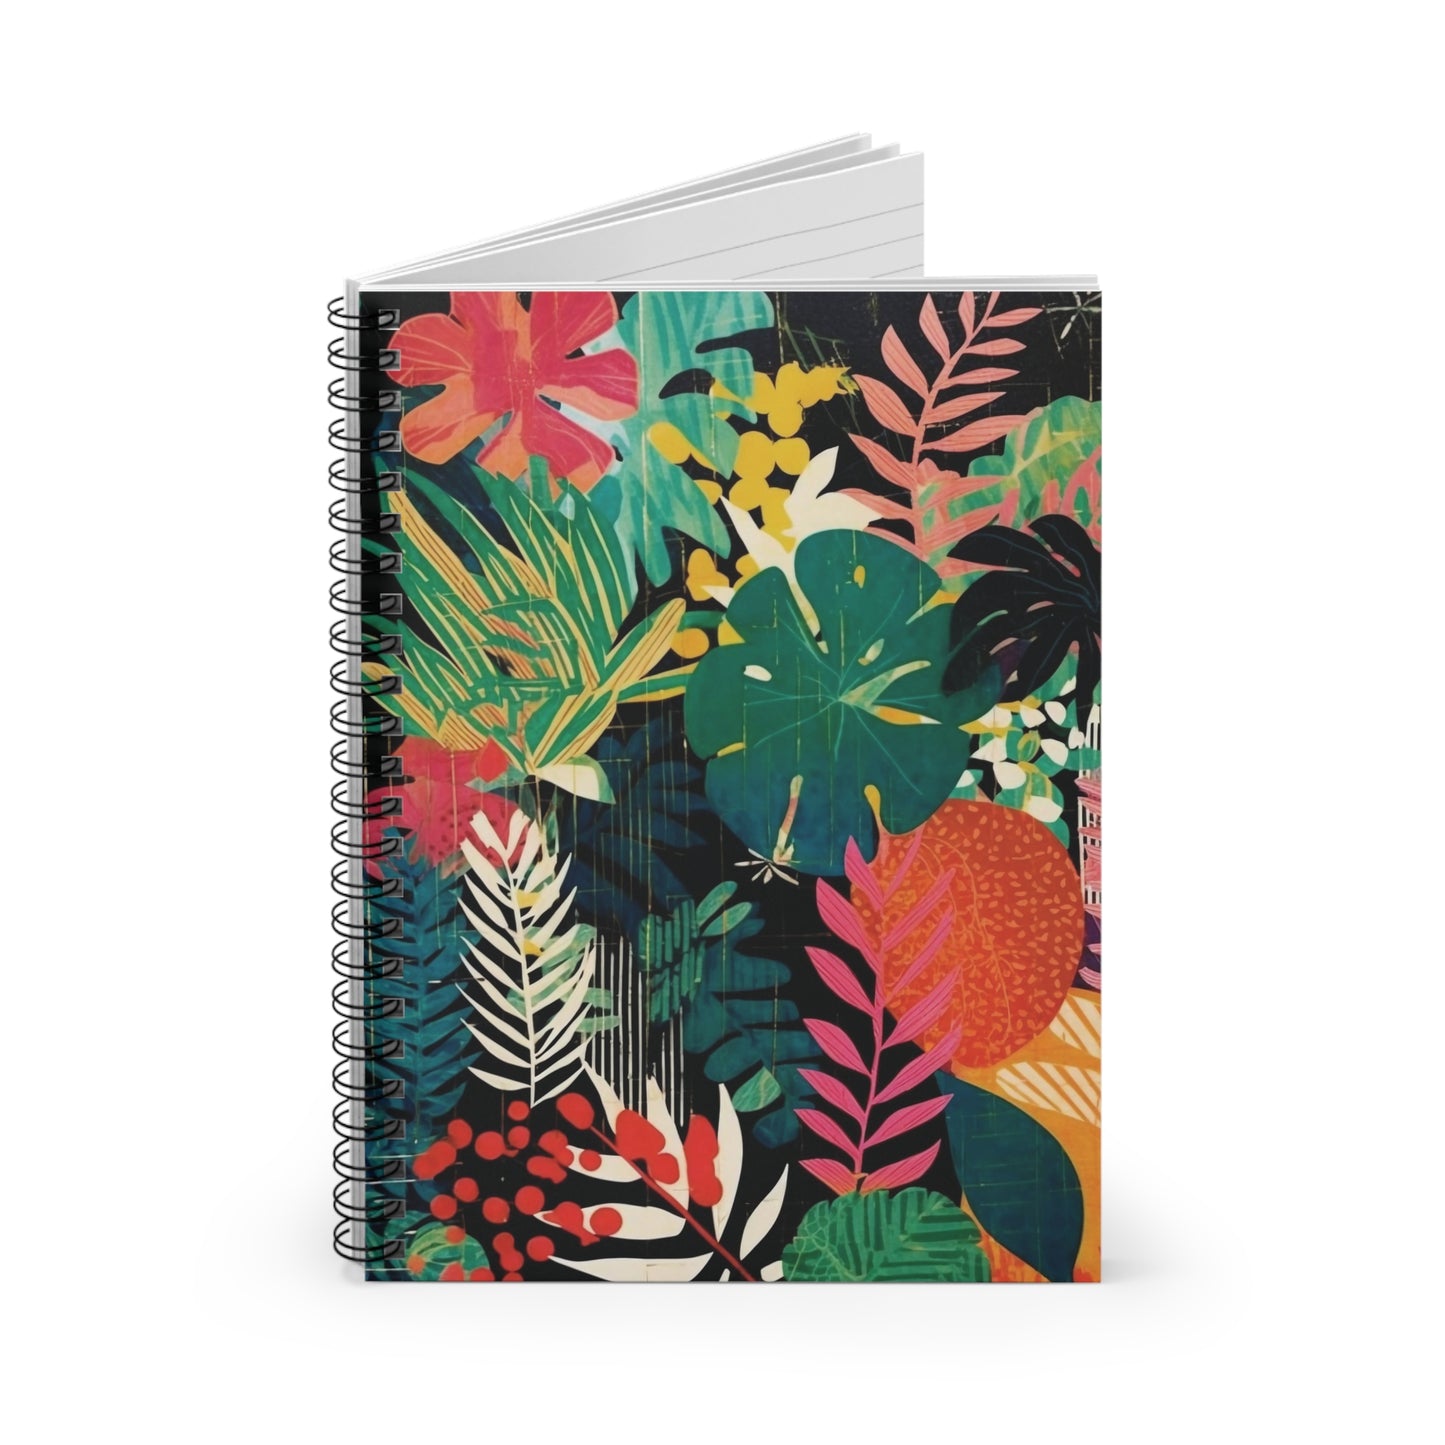 Foliage Collage Art Notebook (2) - Composition Notebook, Spiral Notebook, Journal for Writing and Note-Taking